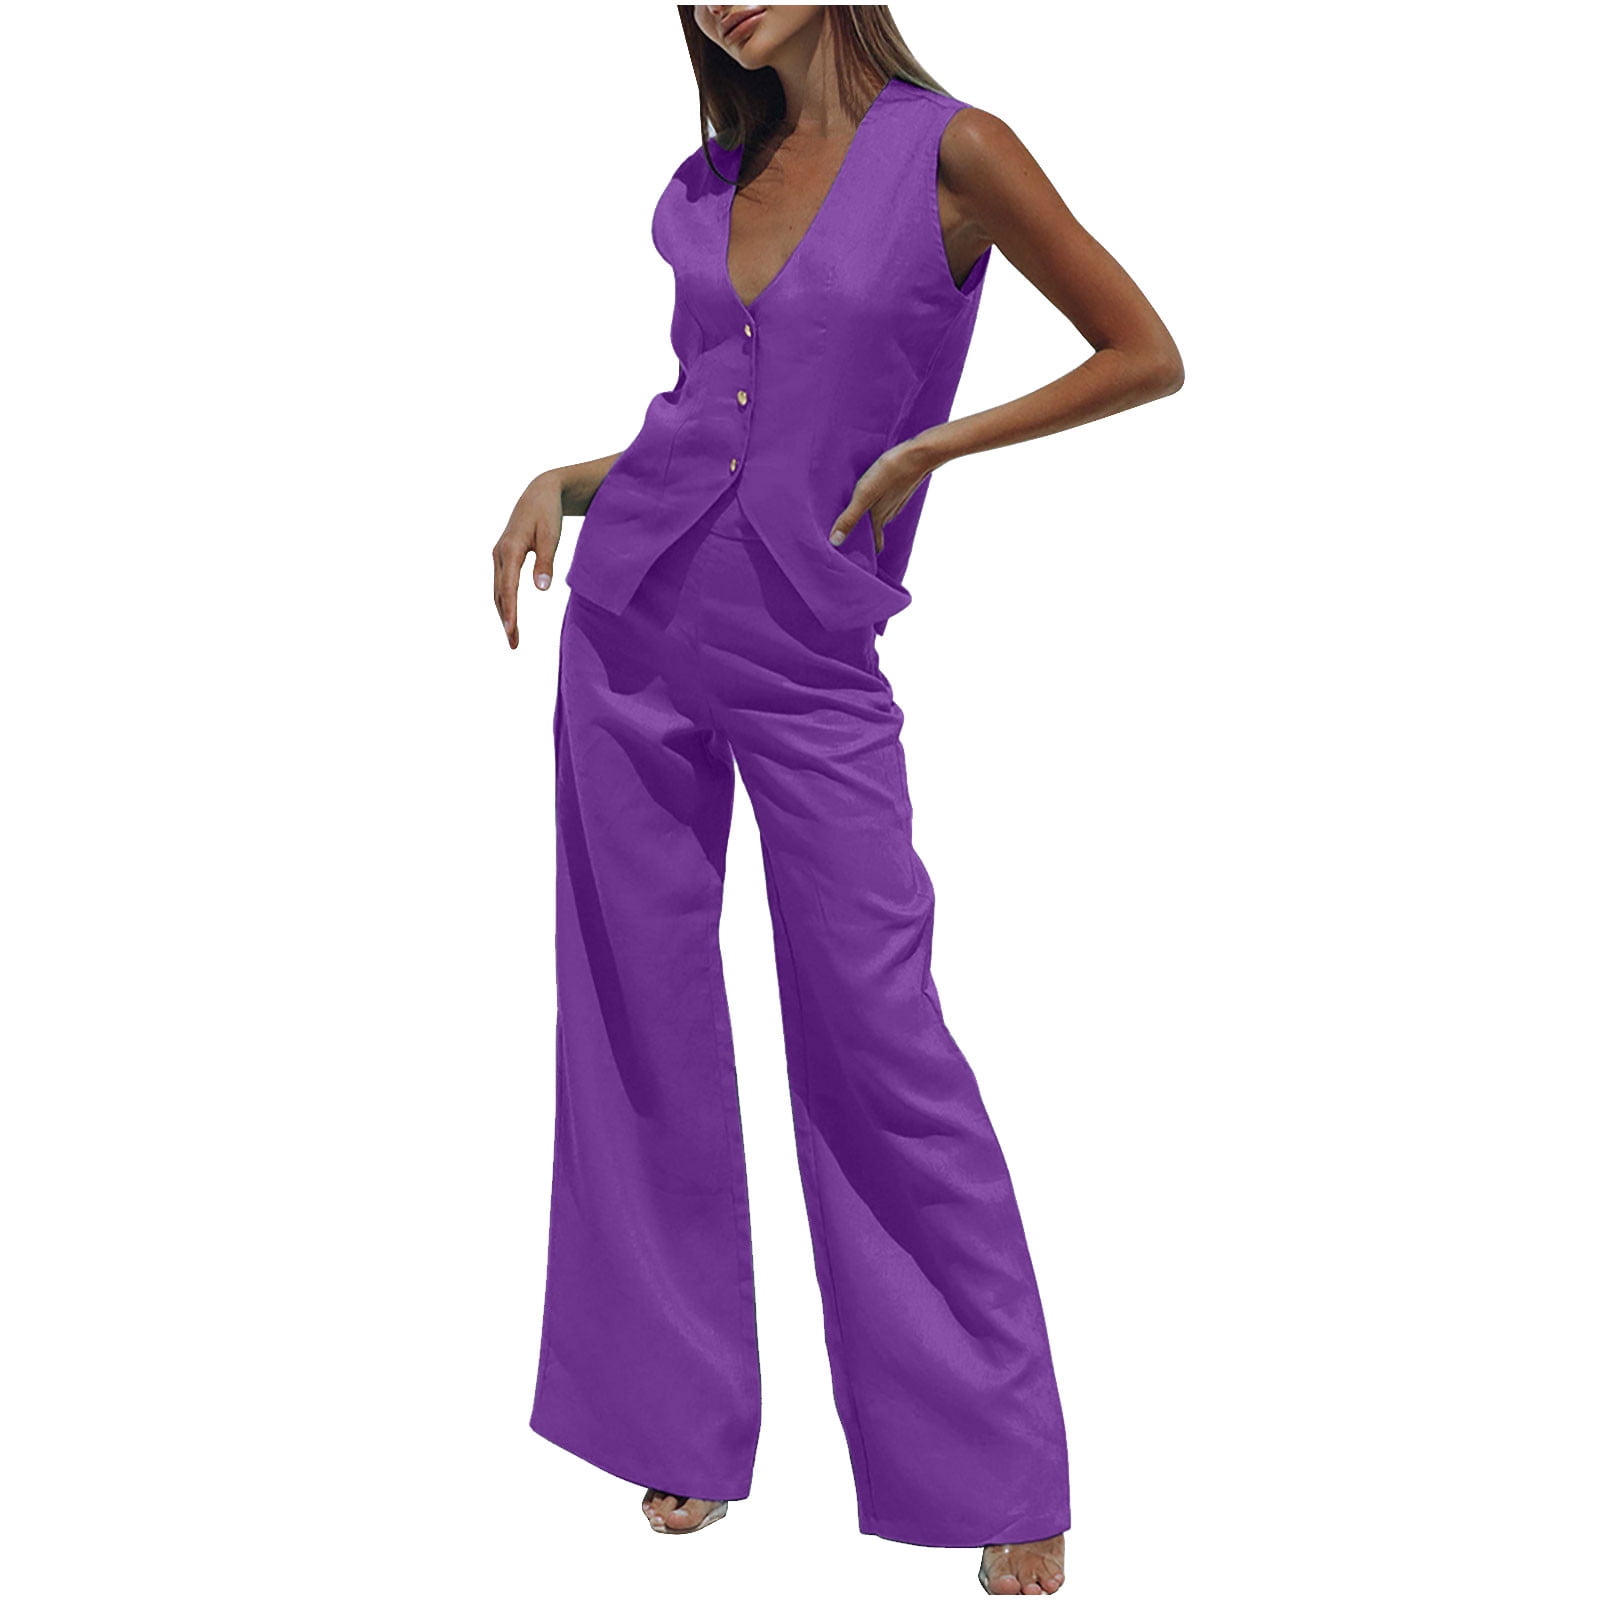 REORIAFEE 2 Piece Outfits for Women Plus Size Summer Yoga Workout Gym Set  Trendy 2023 Vacation Outfits Women's Two Piece Cotton Linen Short Sleeve V  Neck Tops Pants Set Purple XXL 